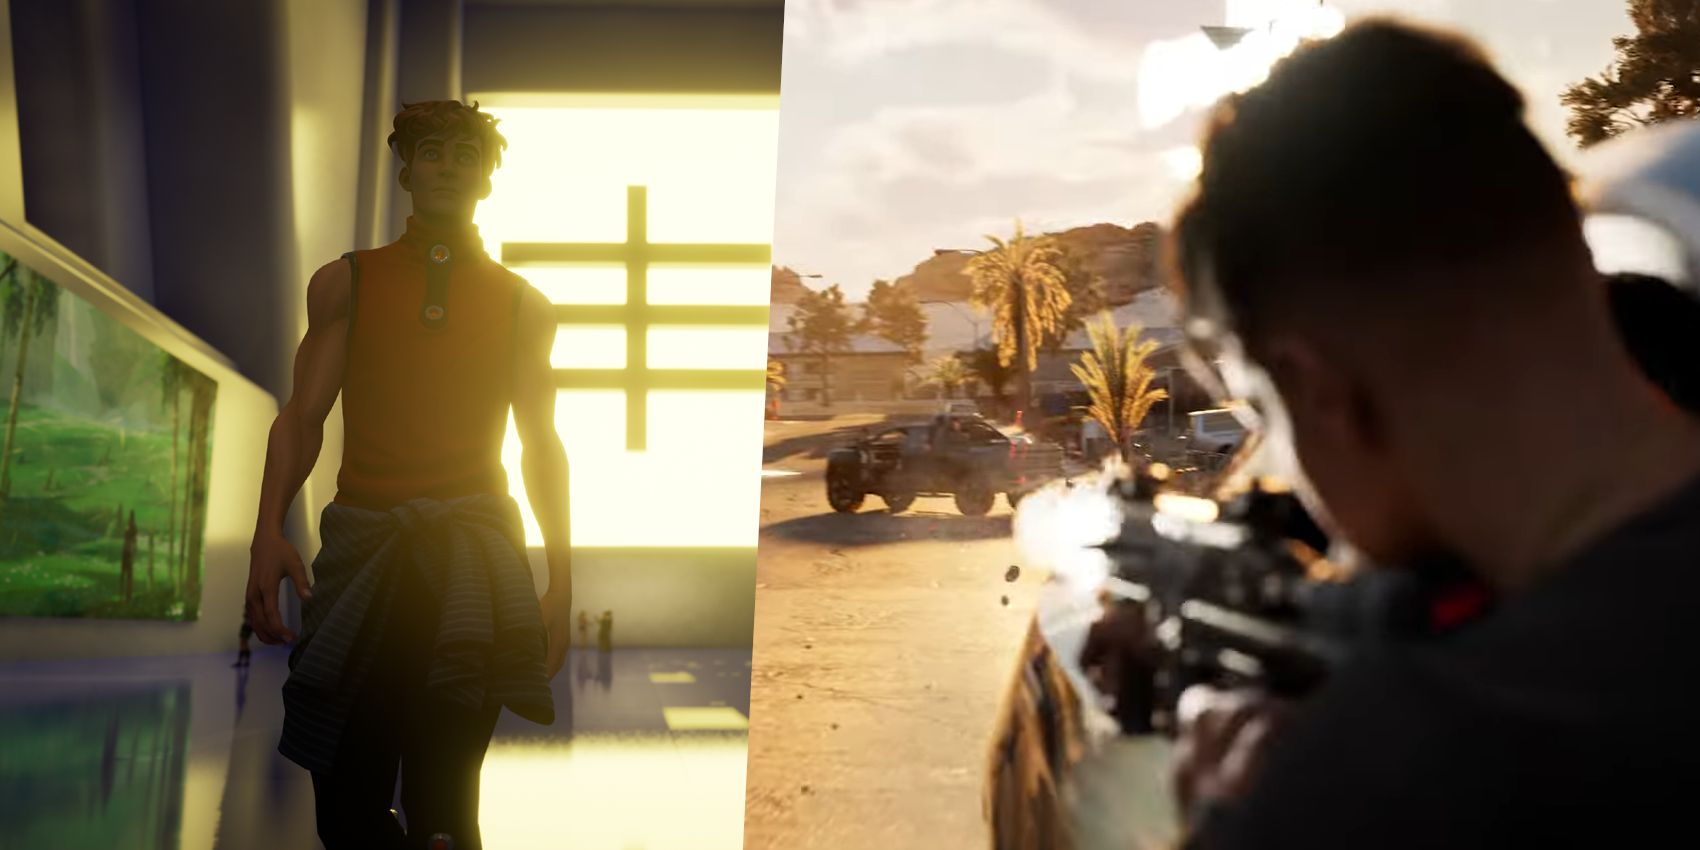 Two images split and combined with one showing a cartoony character walking towards the camera with a bring yellow window illuminating from the background with EVERYWHERE's logo in it. The other image is a young man shooting a weapon over his shoulder in an urban setting.